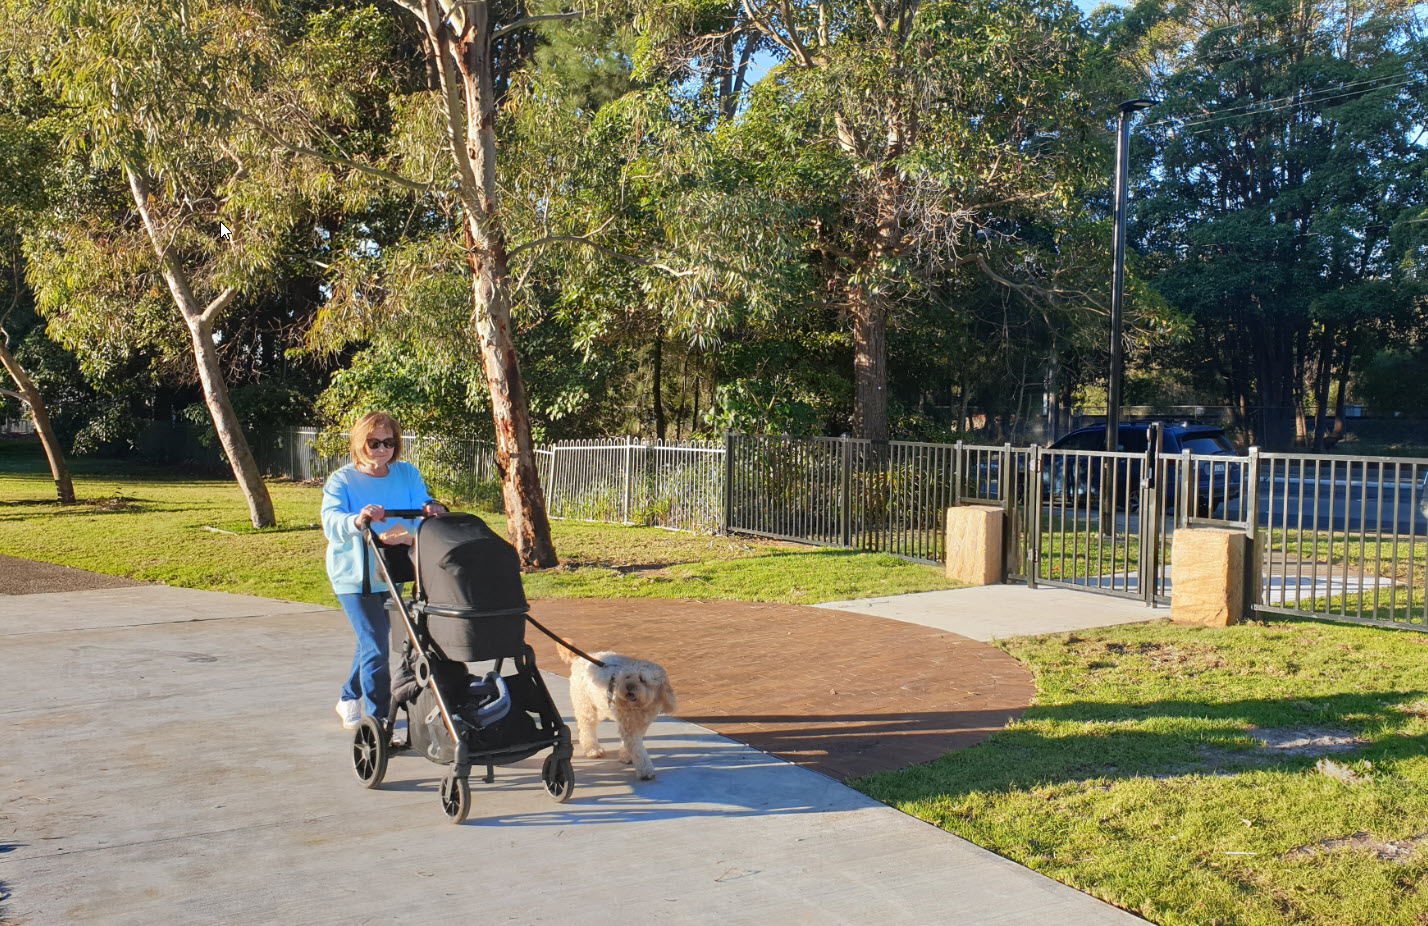 Lady and stroller on wide walking path near entry gate